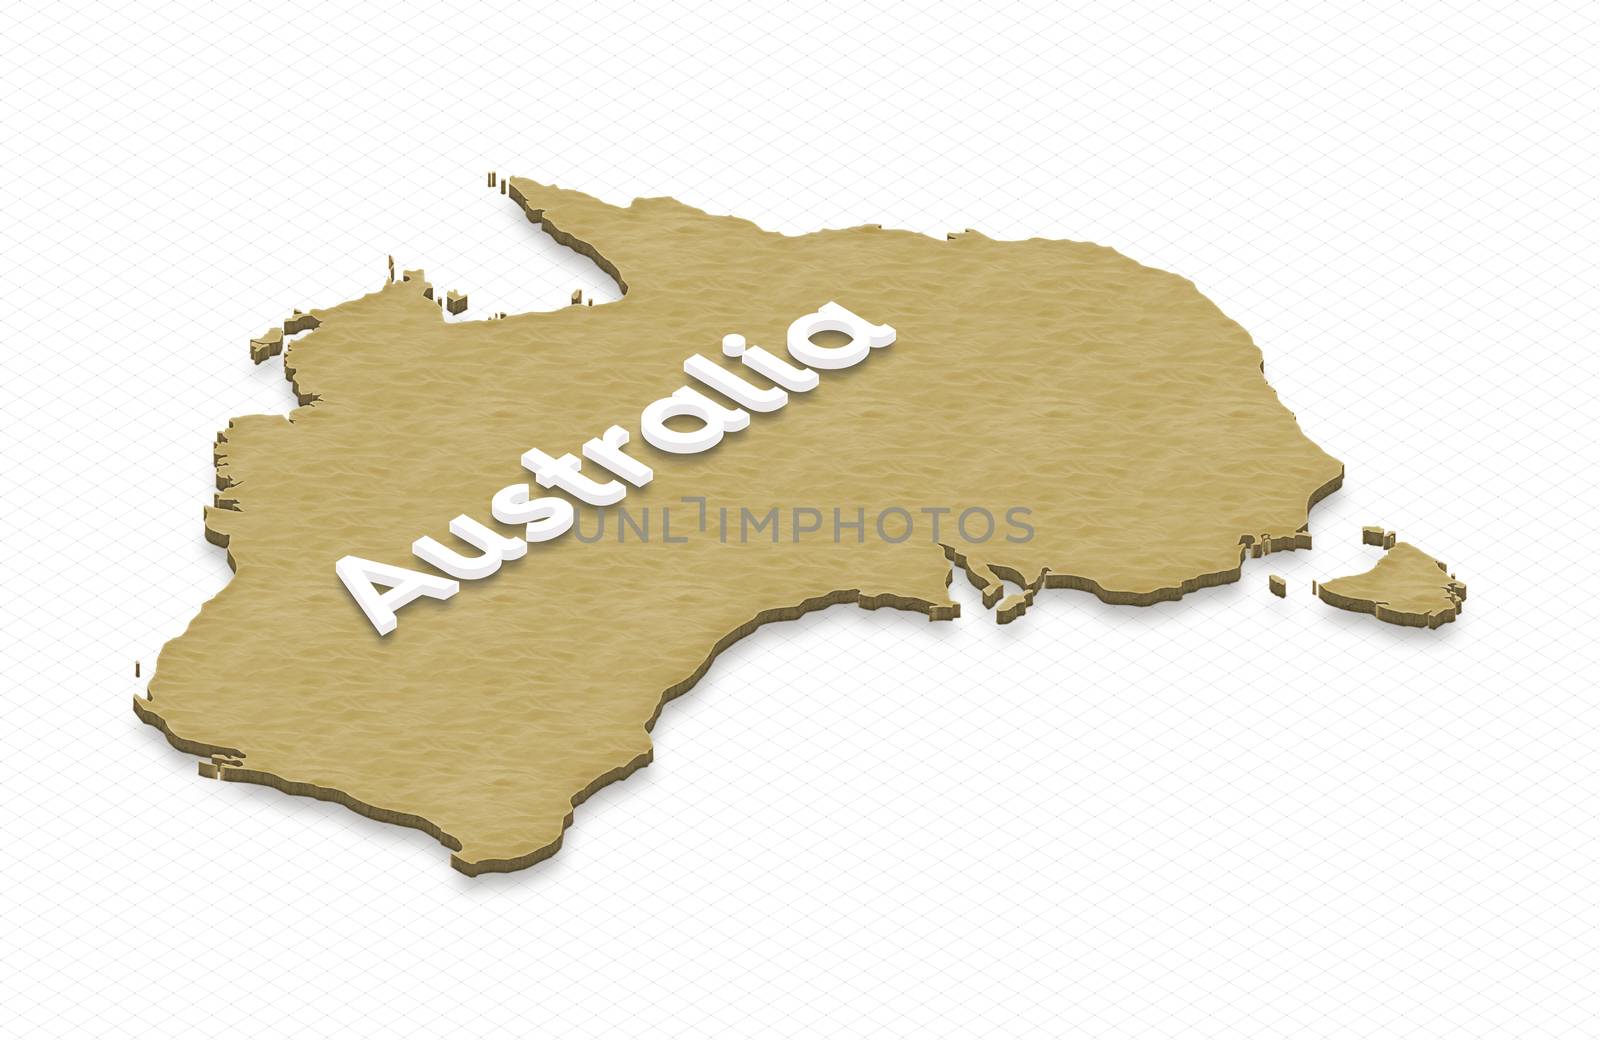 Illustration of a sand ground map of Australia on grid background. Right 3D isometric projection with the name of continent.